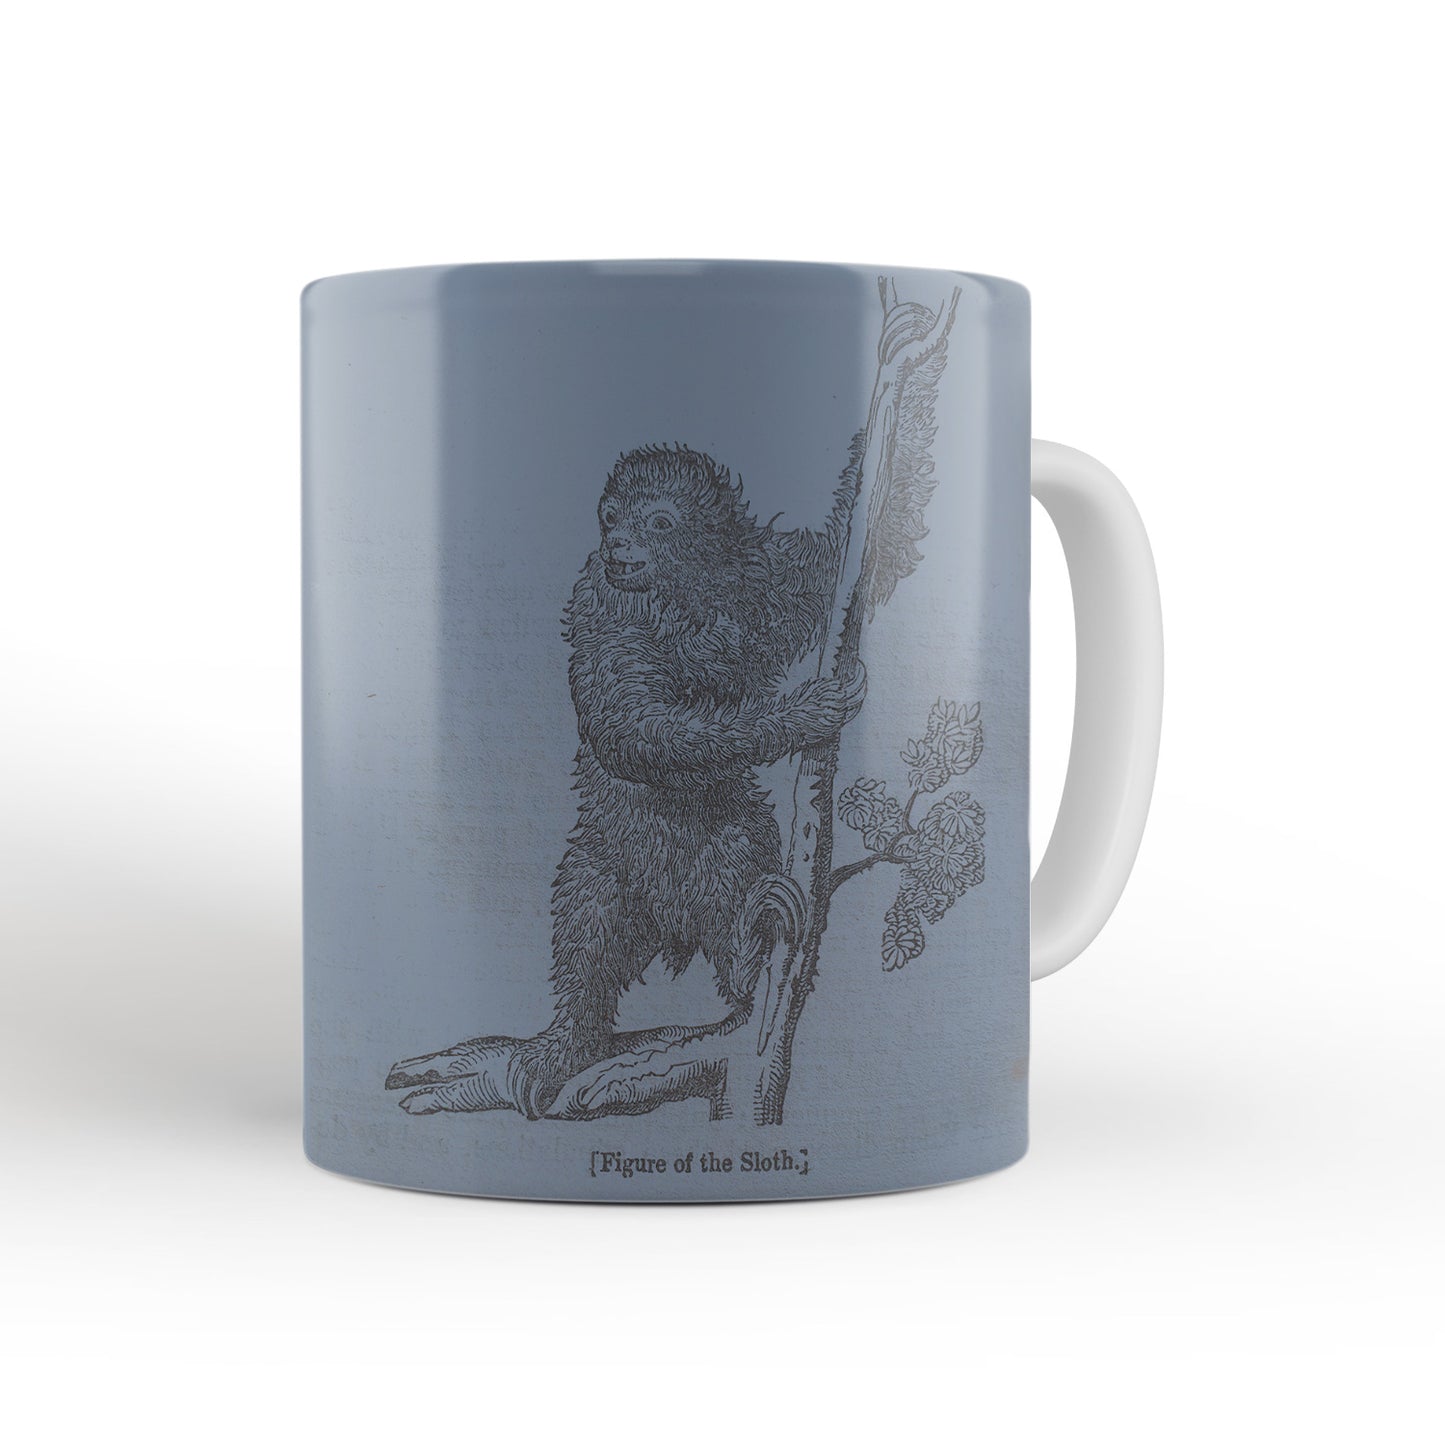 Blue Sloth Mug from The Penny Cyclopædia (1833 to 1843), Leighton Library